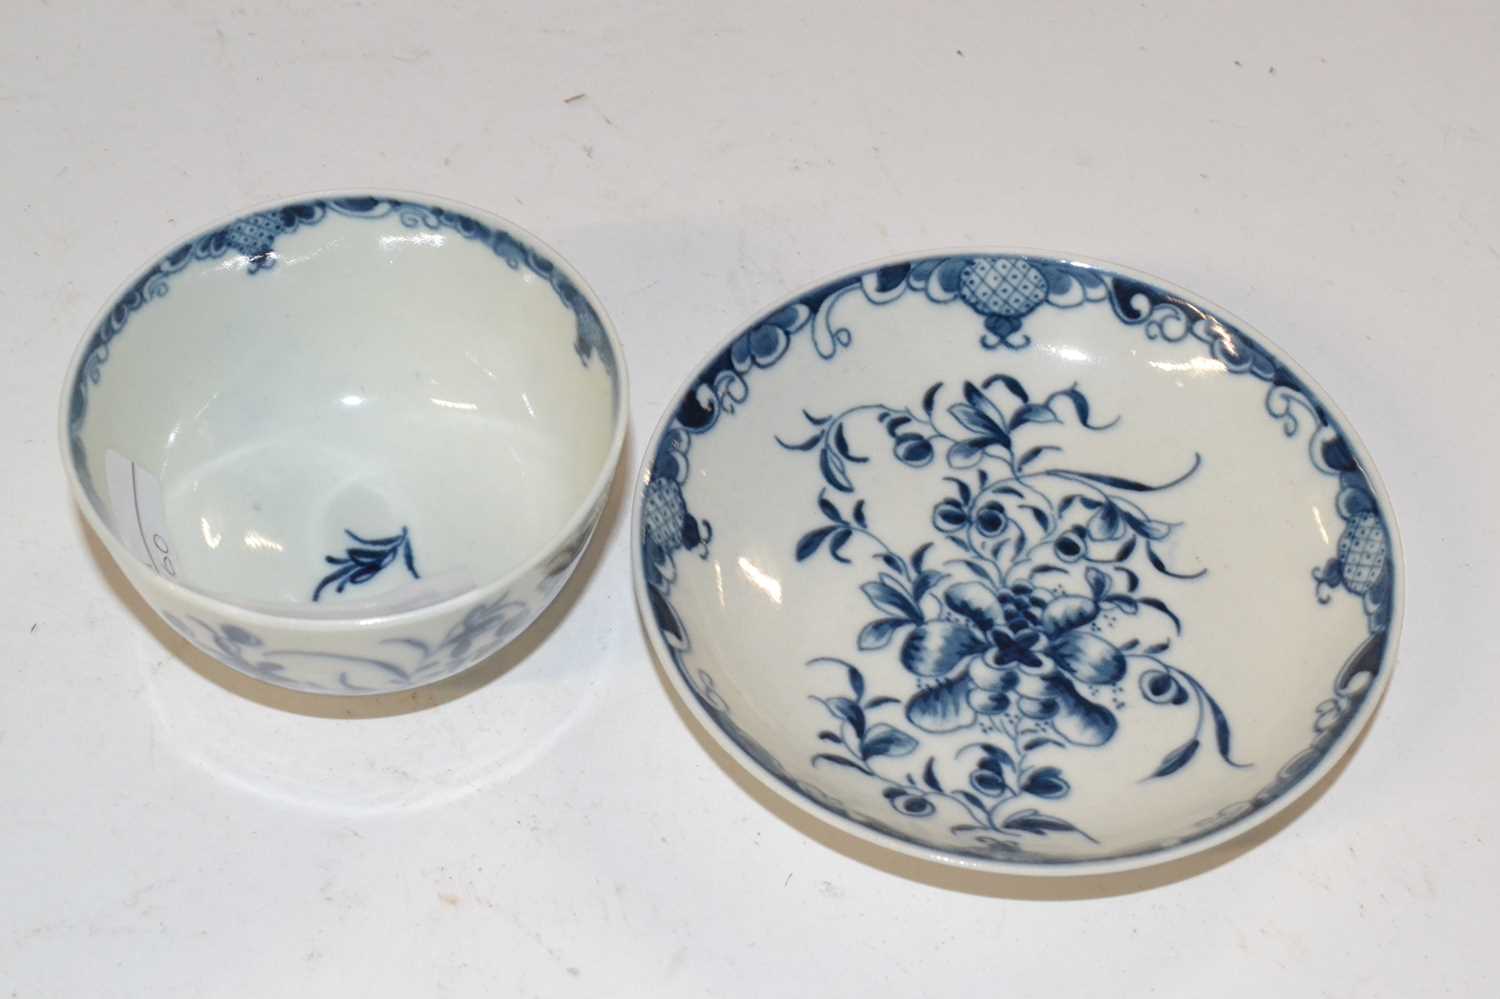 A Lowestoft porcelain tea bowl and saucer with blue and white design - Image 2 of 3